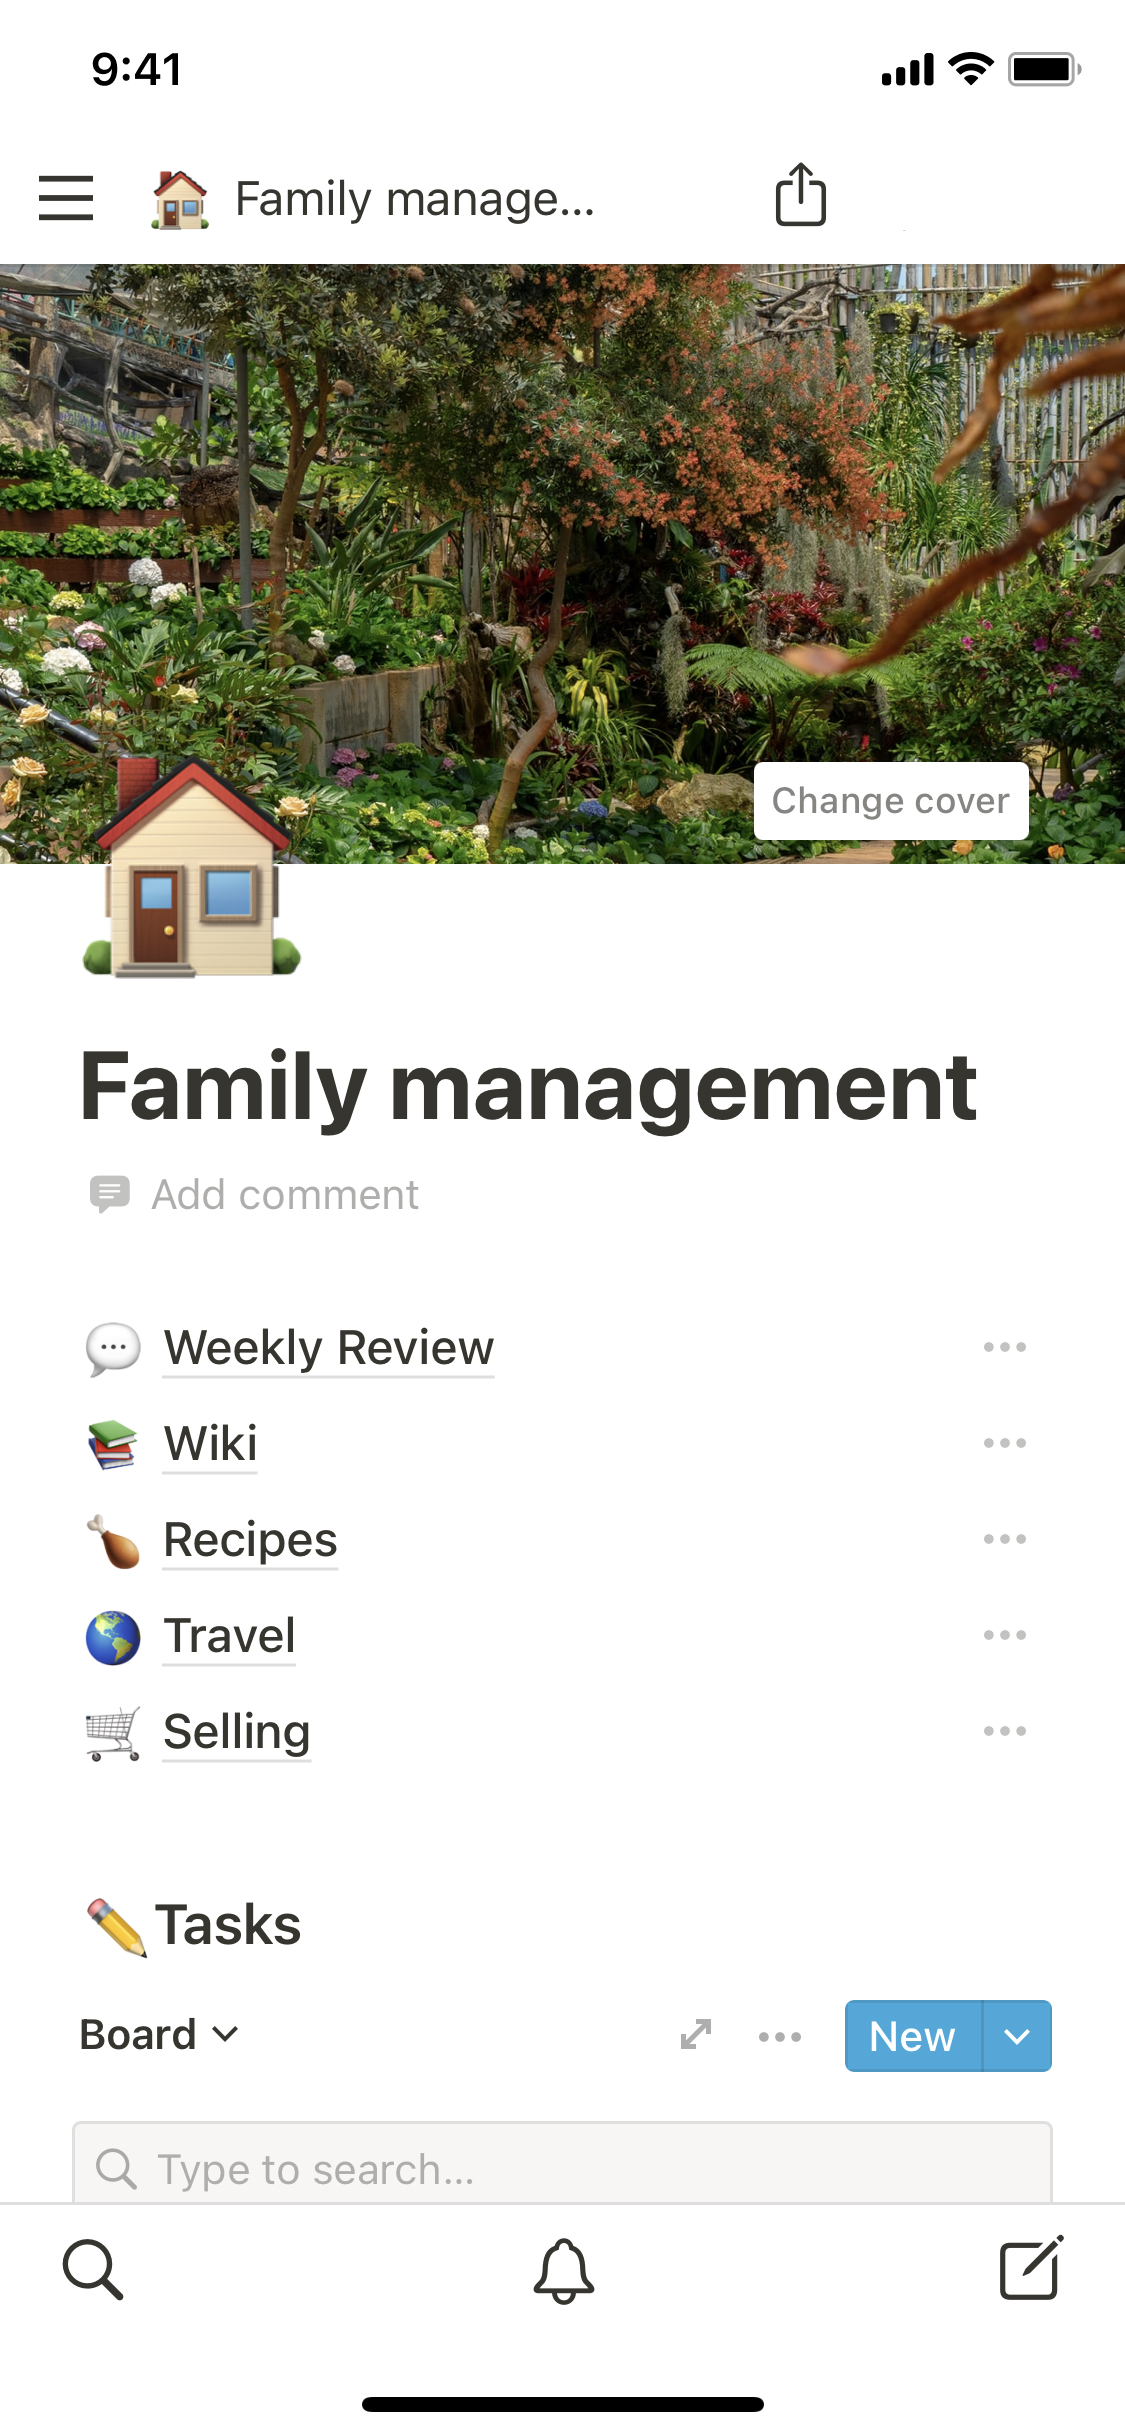 The mobile image for the Family management template